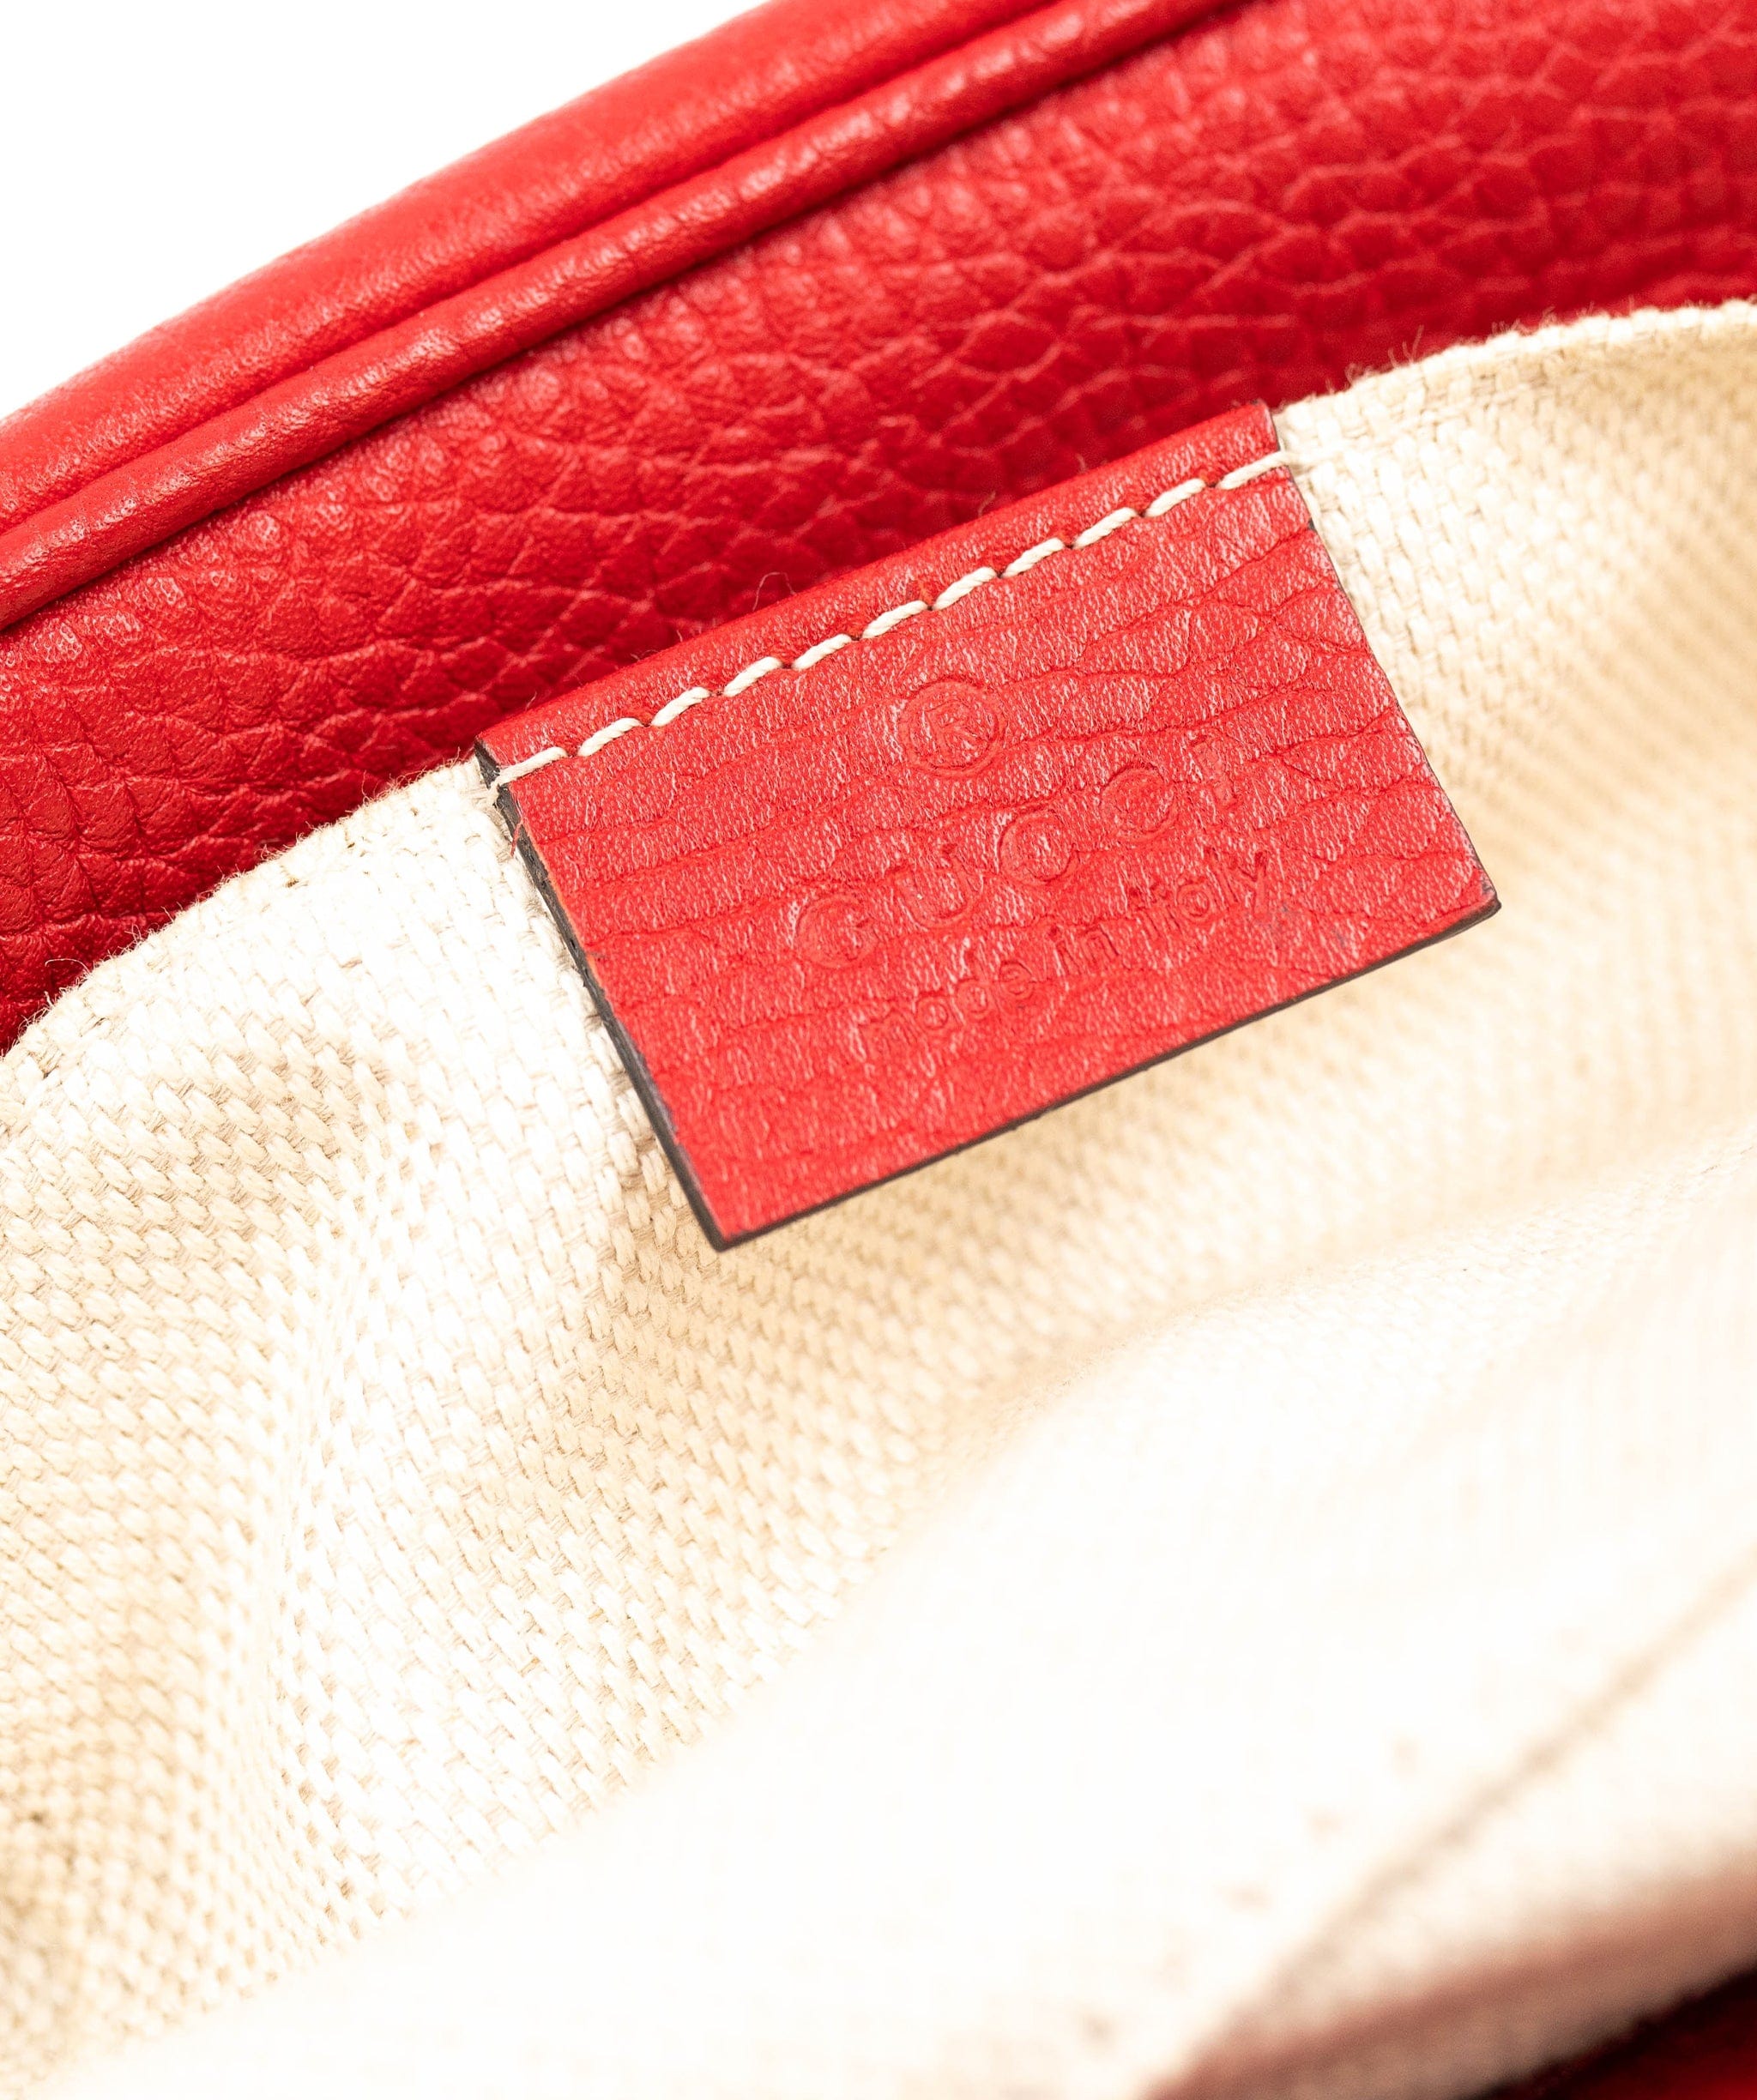 Gucci Red Gucci Soho camera bag with GG logo on the front - AGL2121